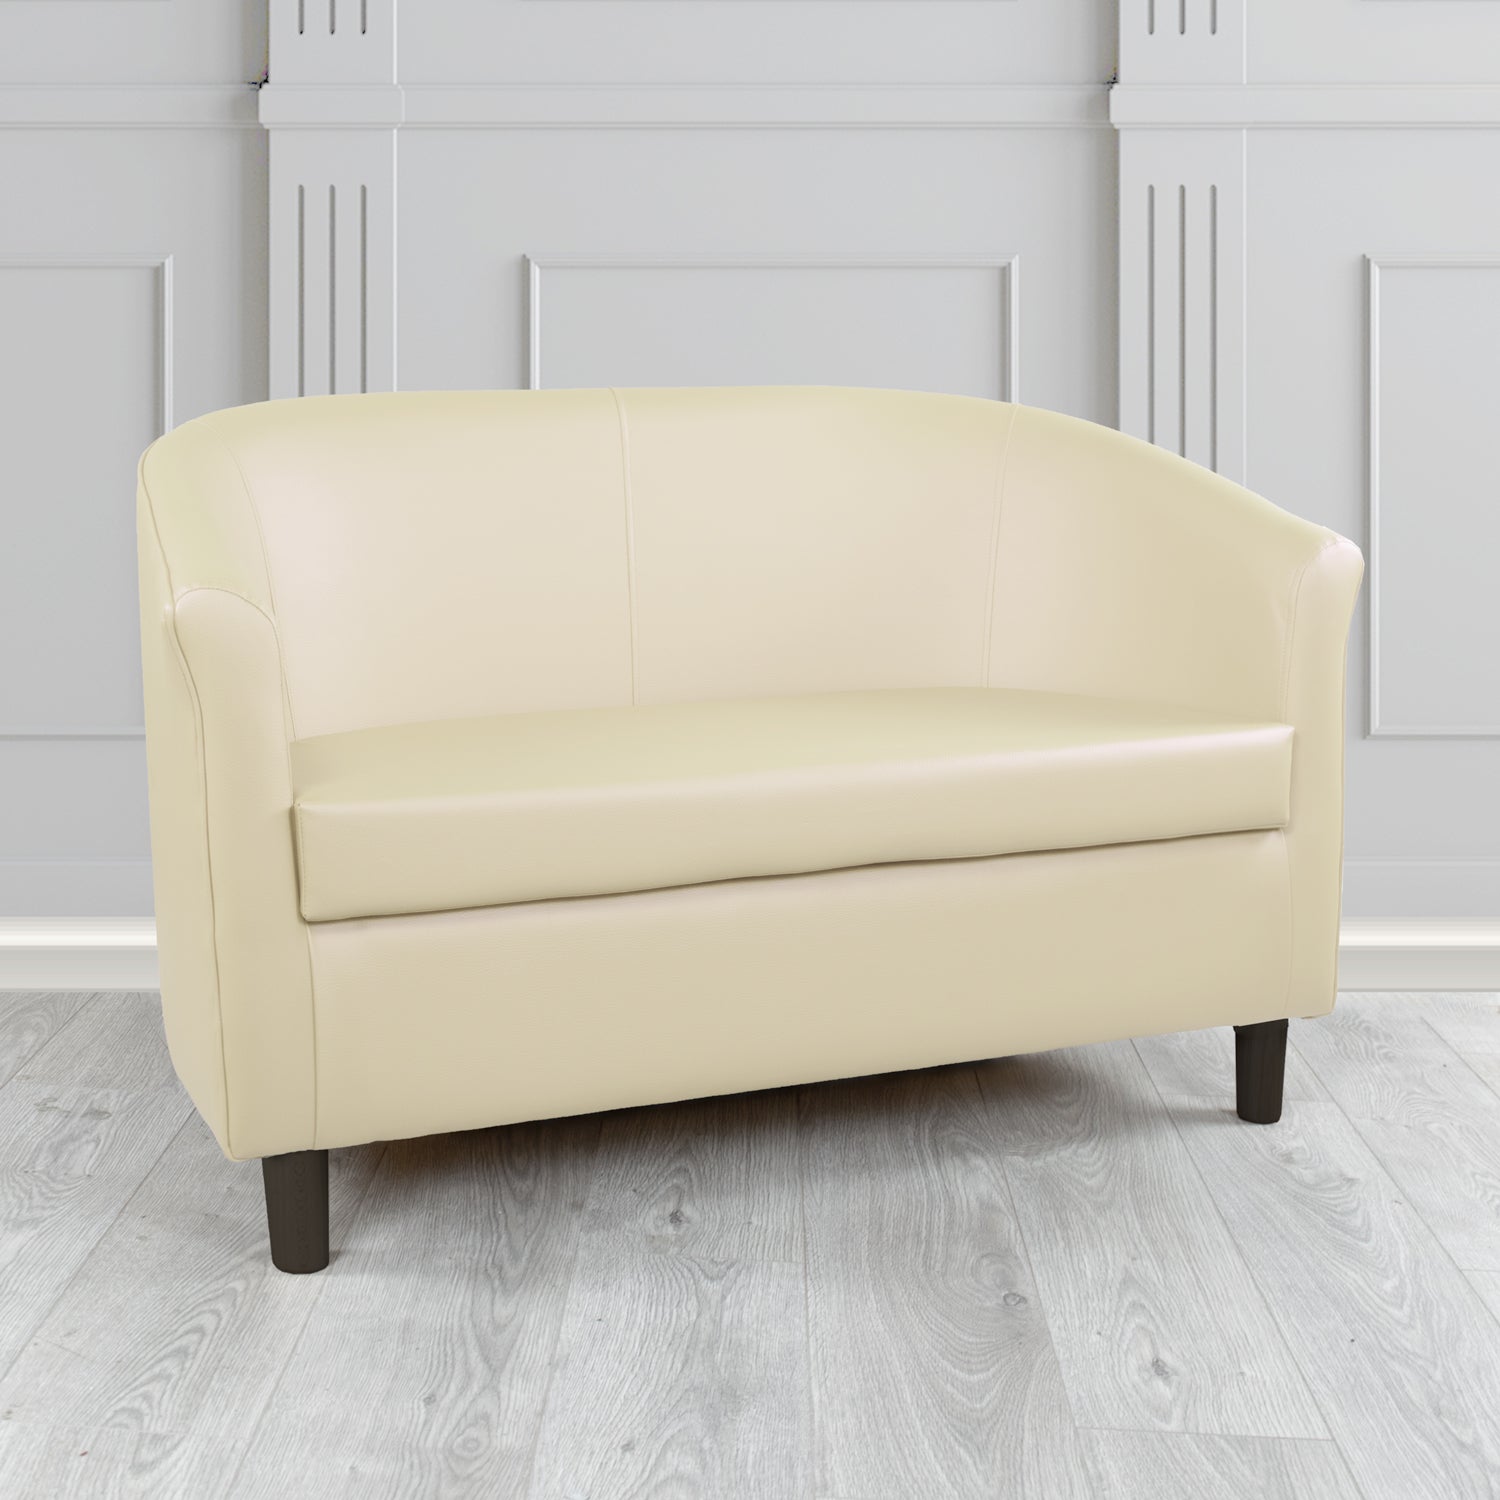 Tuscany 2 Seater Tub Sofa in Madrid Cream Faux Leather - The Tub Chair Shop